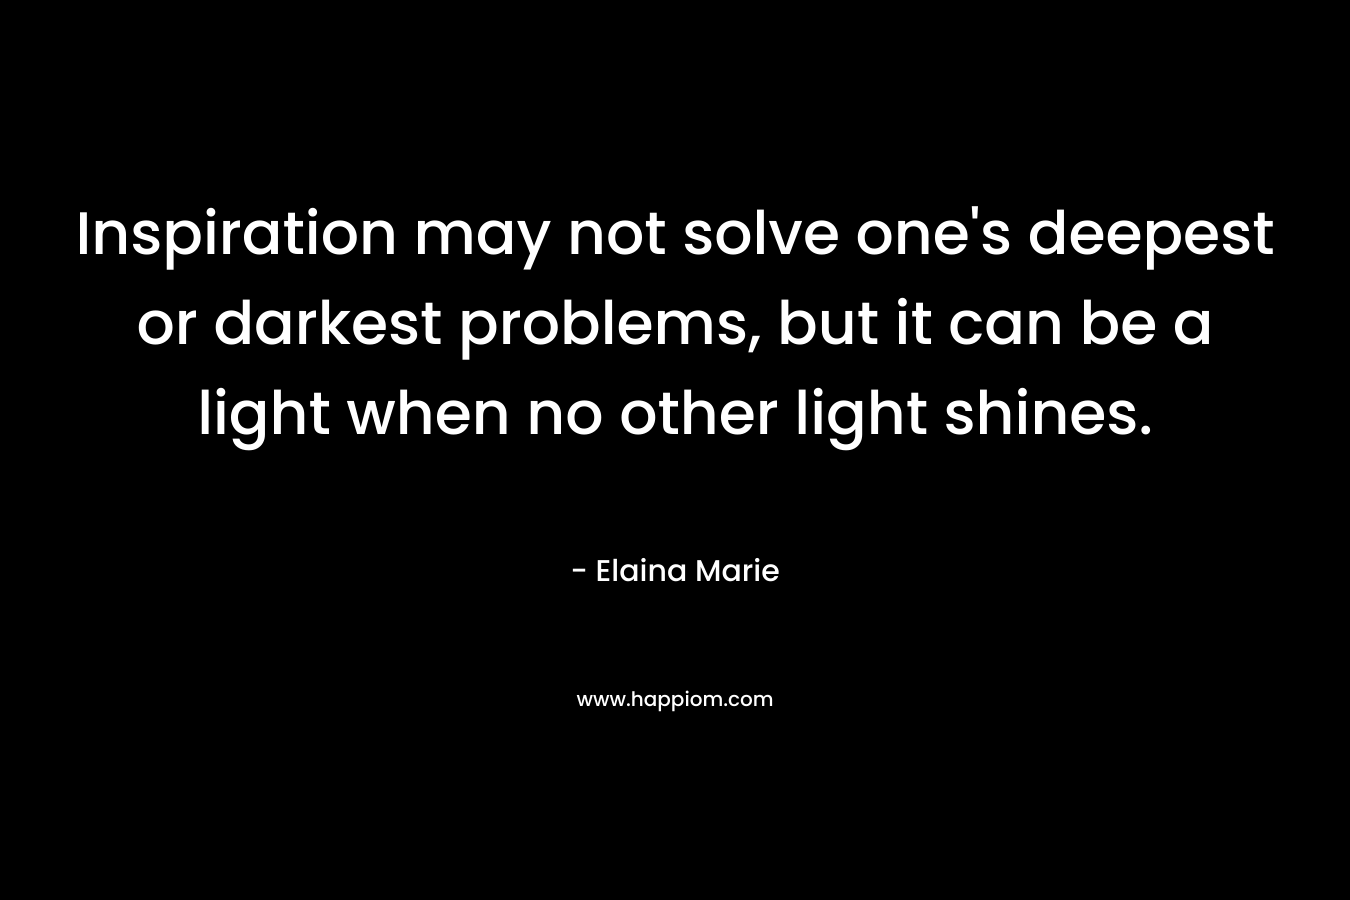 Inspiration may not solve one's deepest or darkest problems, but it can be a light when no other light shines.